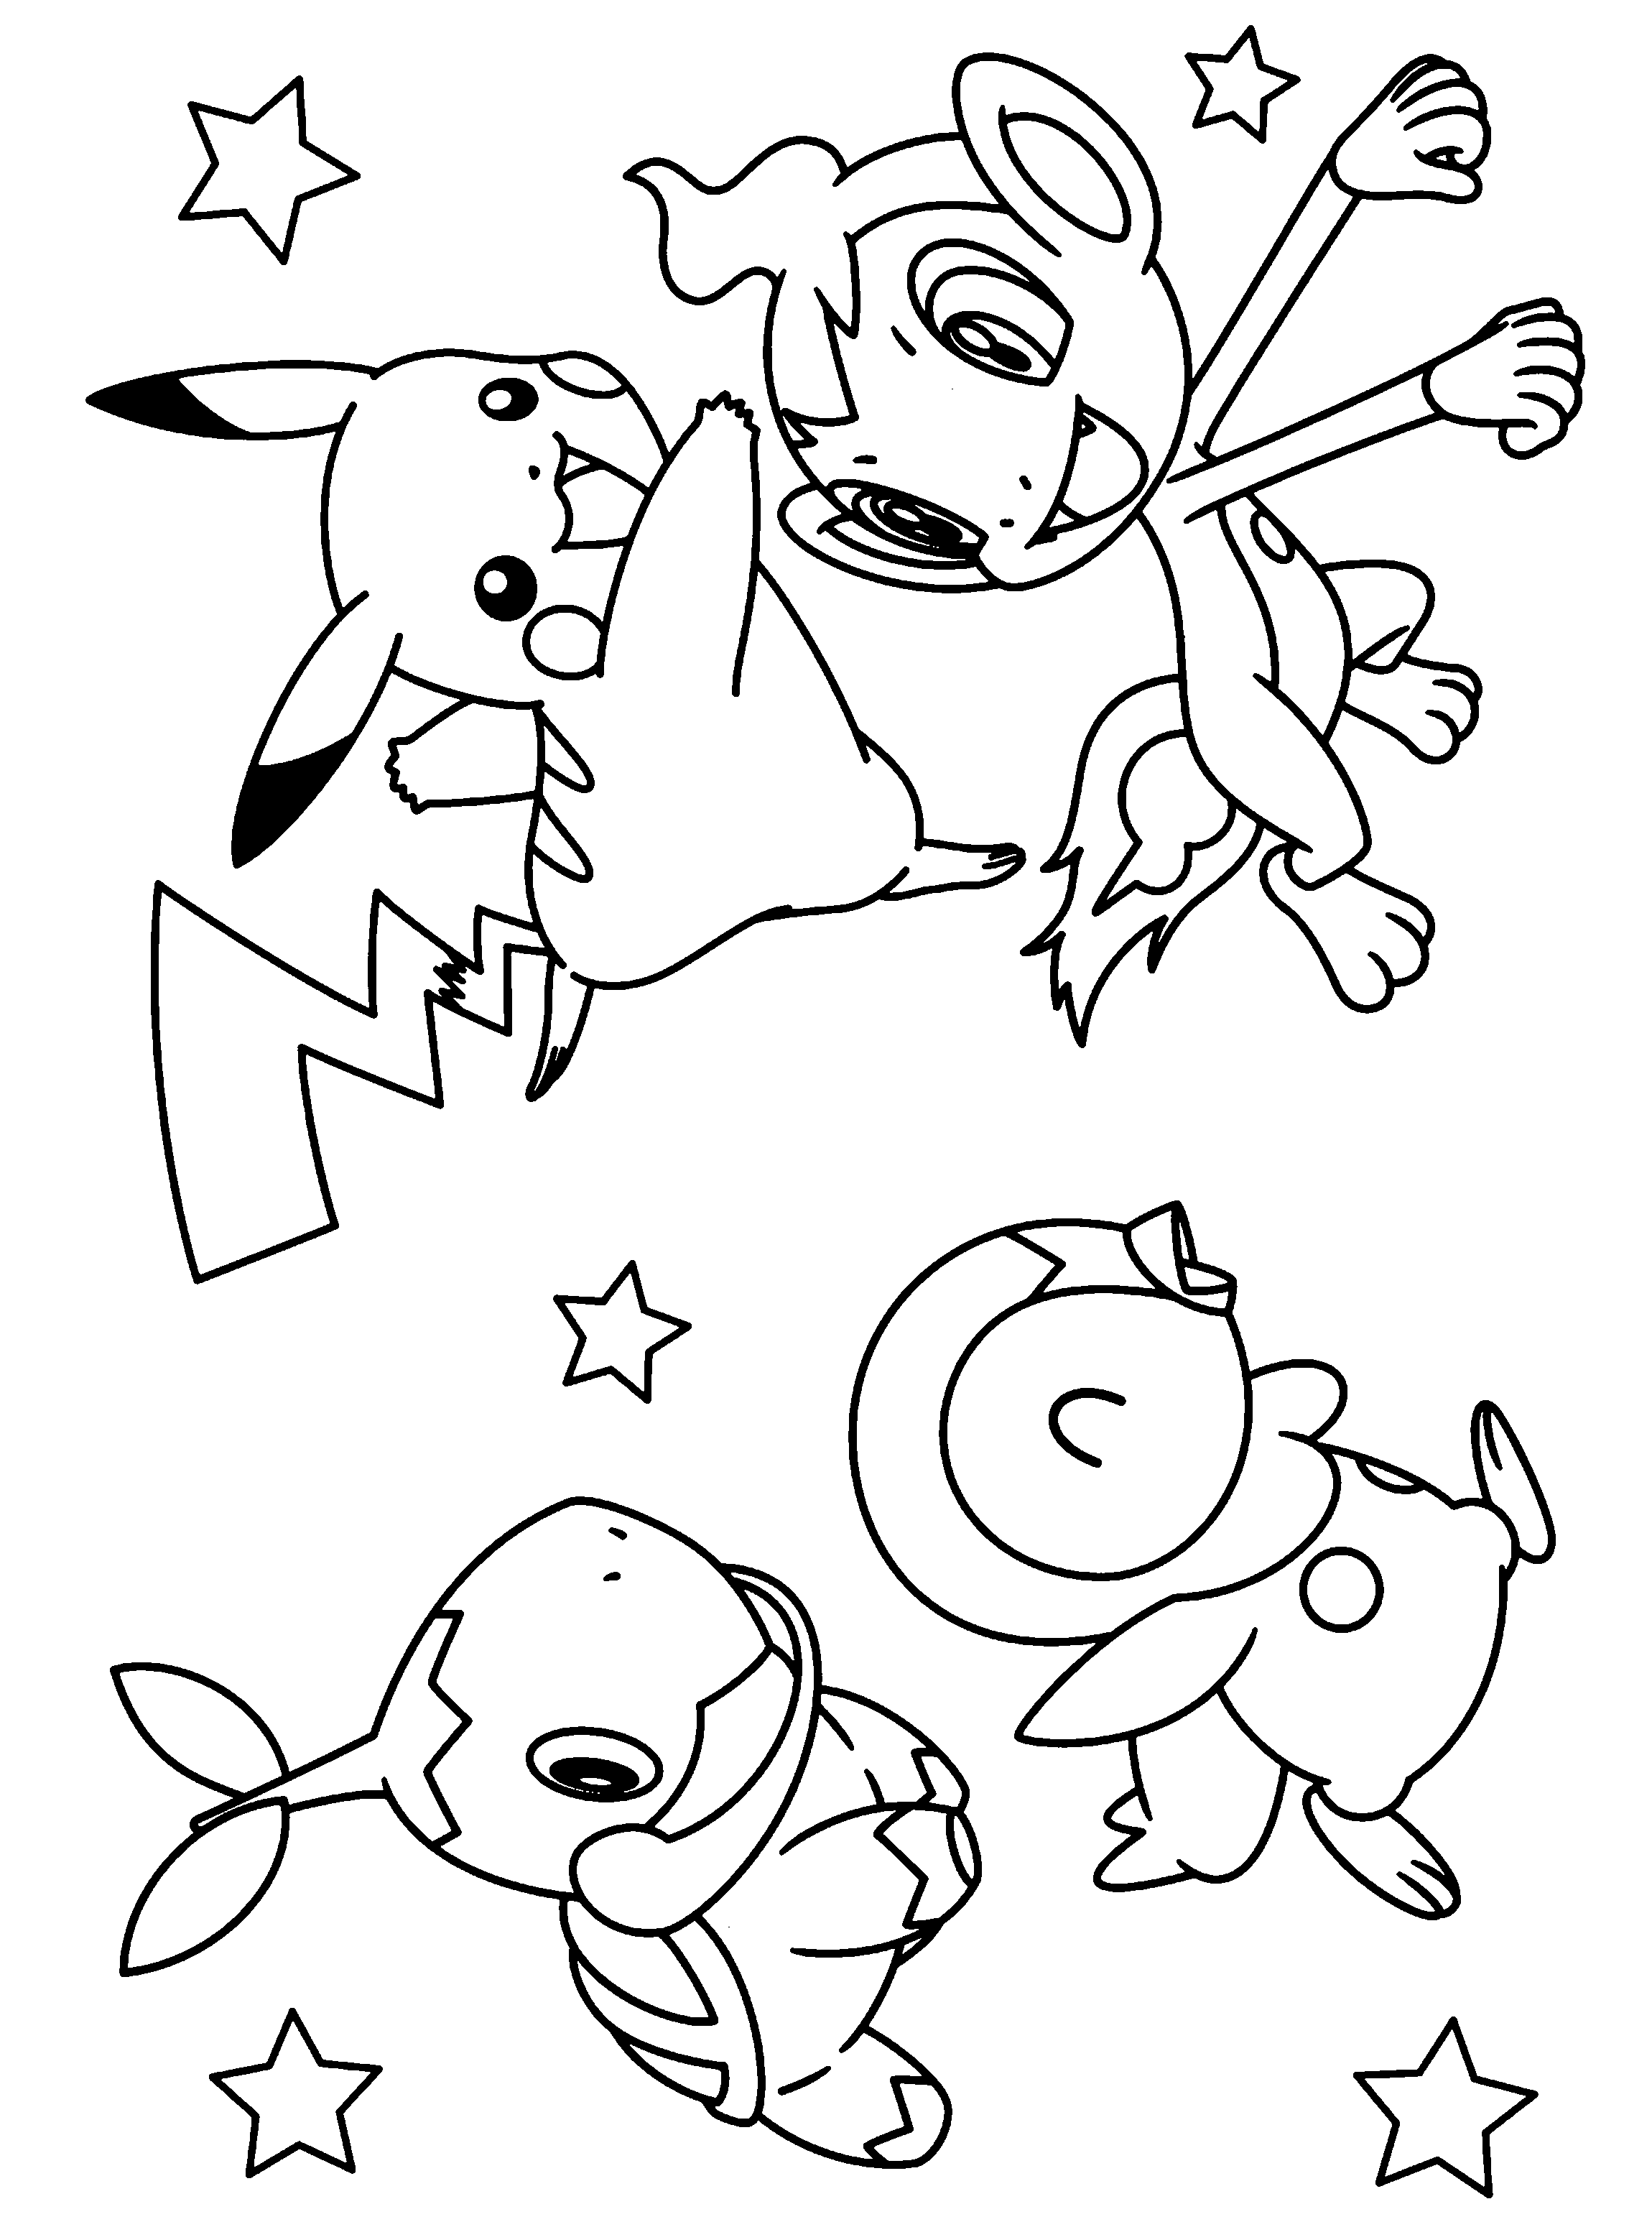 Pokemon coloring pages | Kids coloring pages | #1